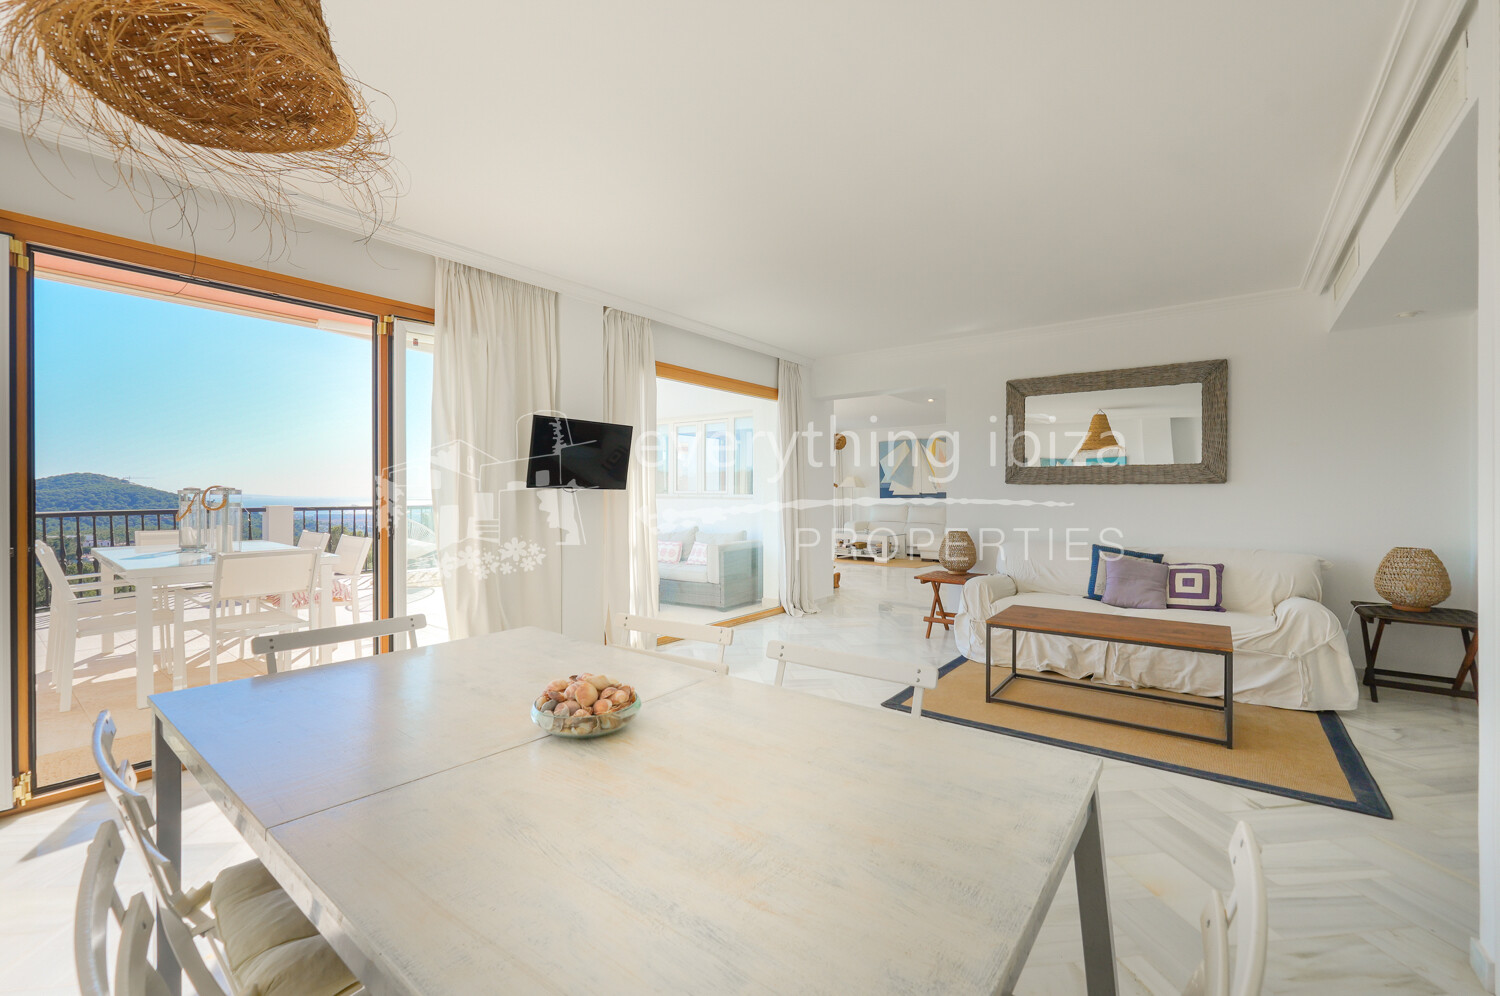 Two Stunning Penthouse Apartments with Super Views in Exclusive Can Furnet, ref. 1724, for sale in Ibiza by everything ibiza Properties